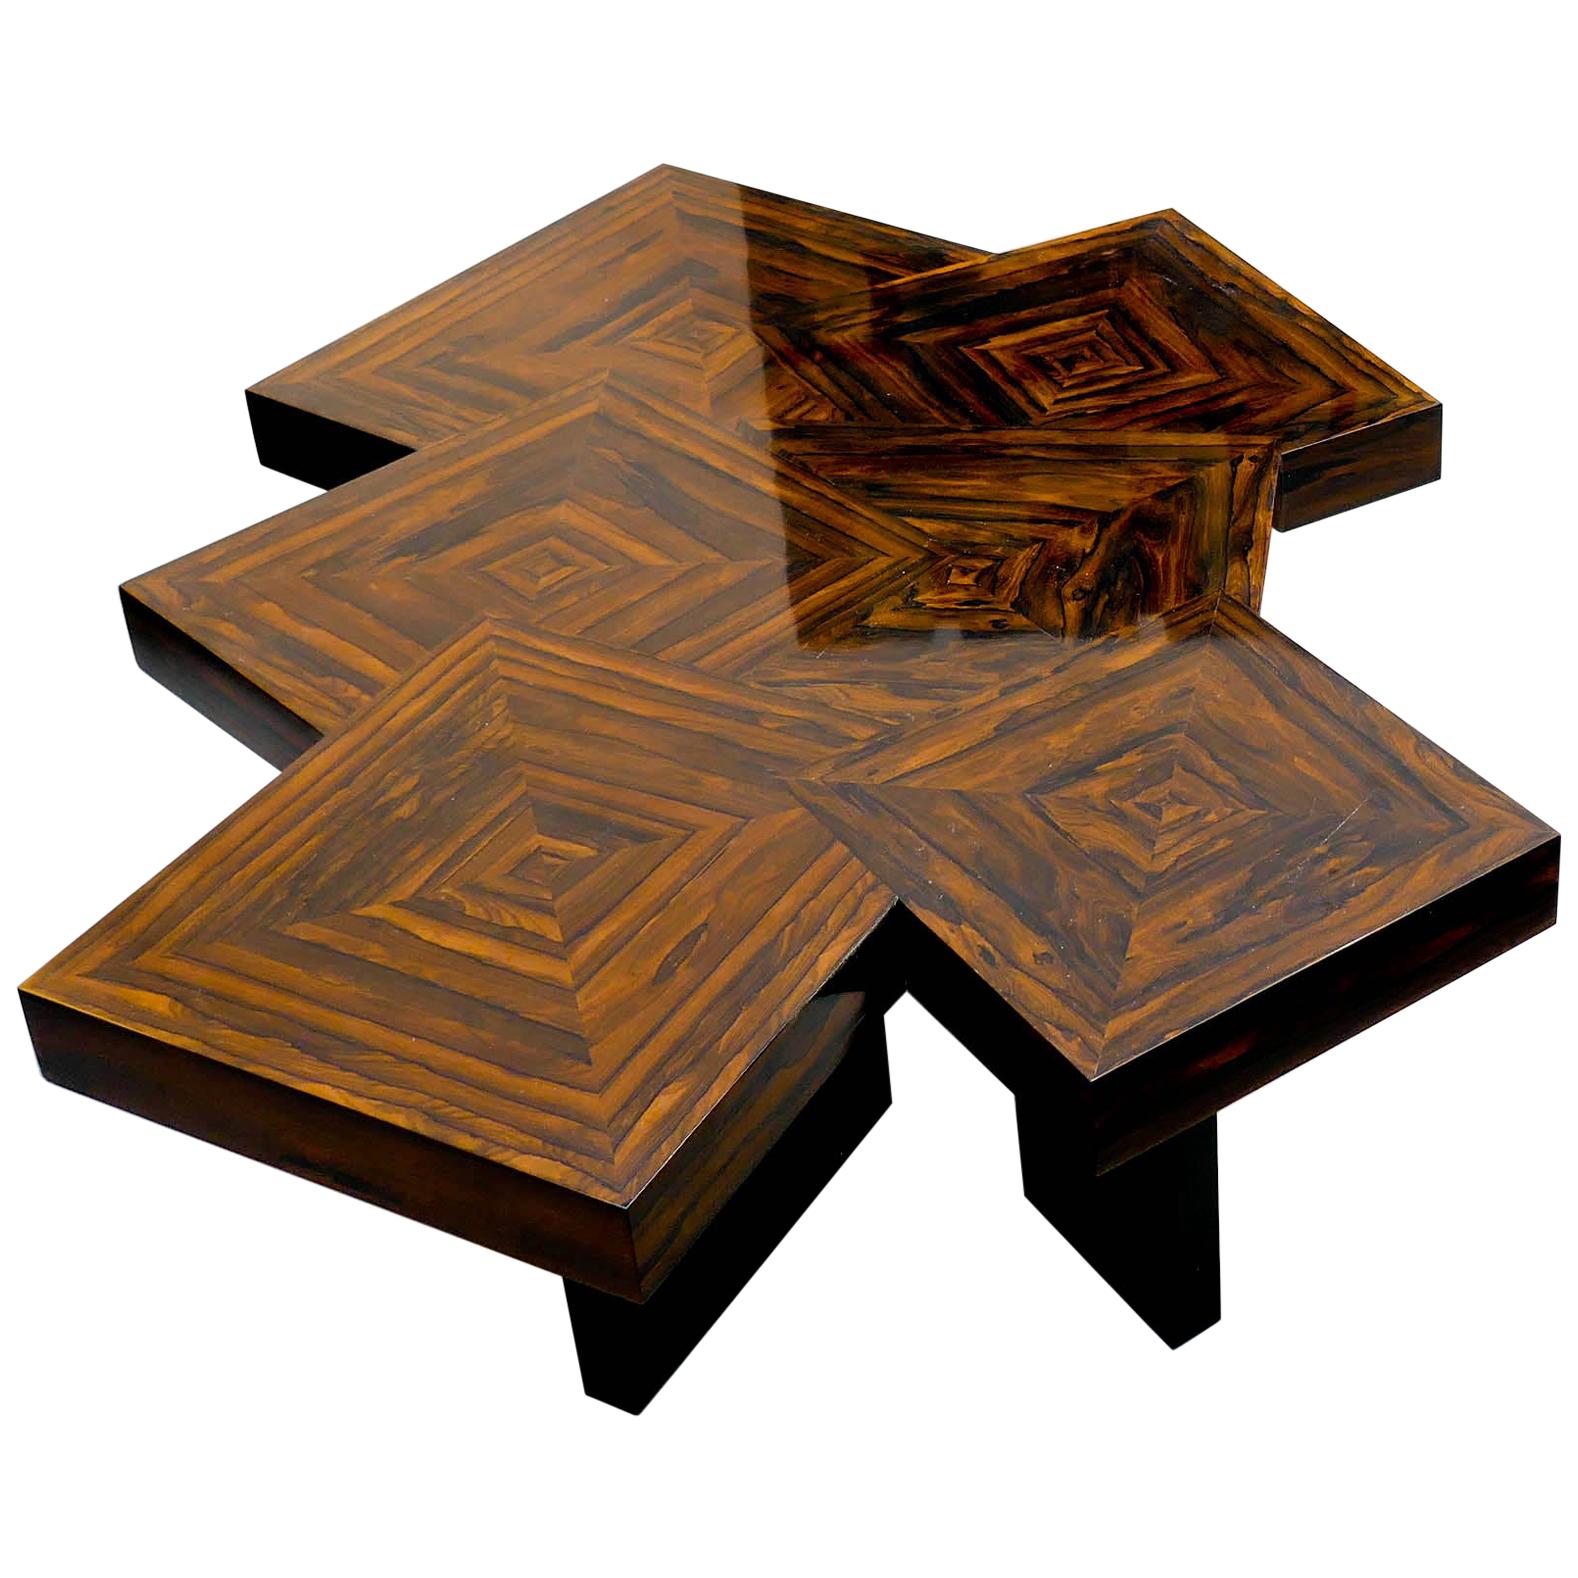 Coffee Table "Cubes" in Ziricote Wood Marquetery by Aymeric Lefort